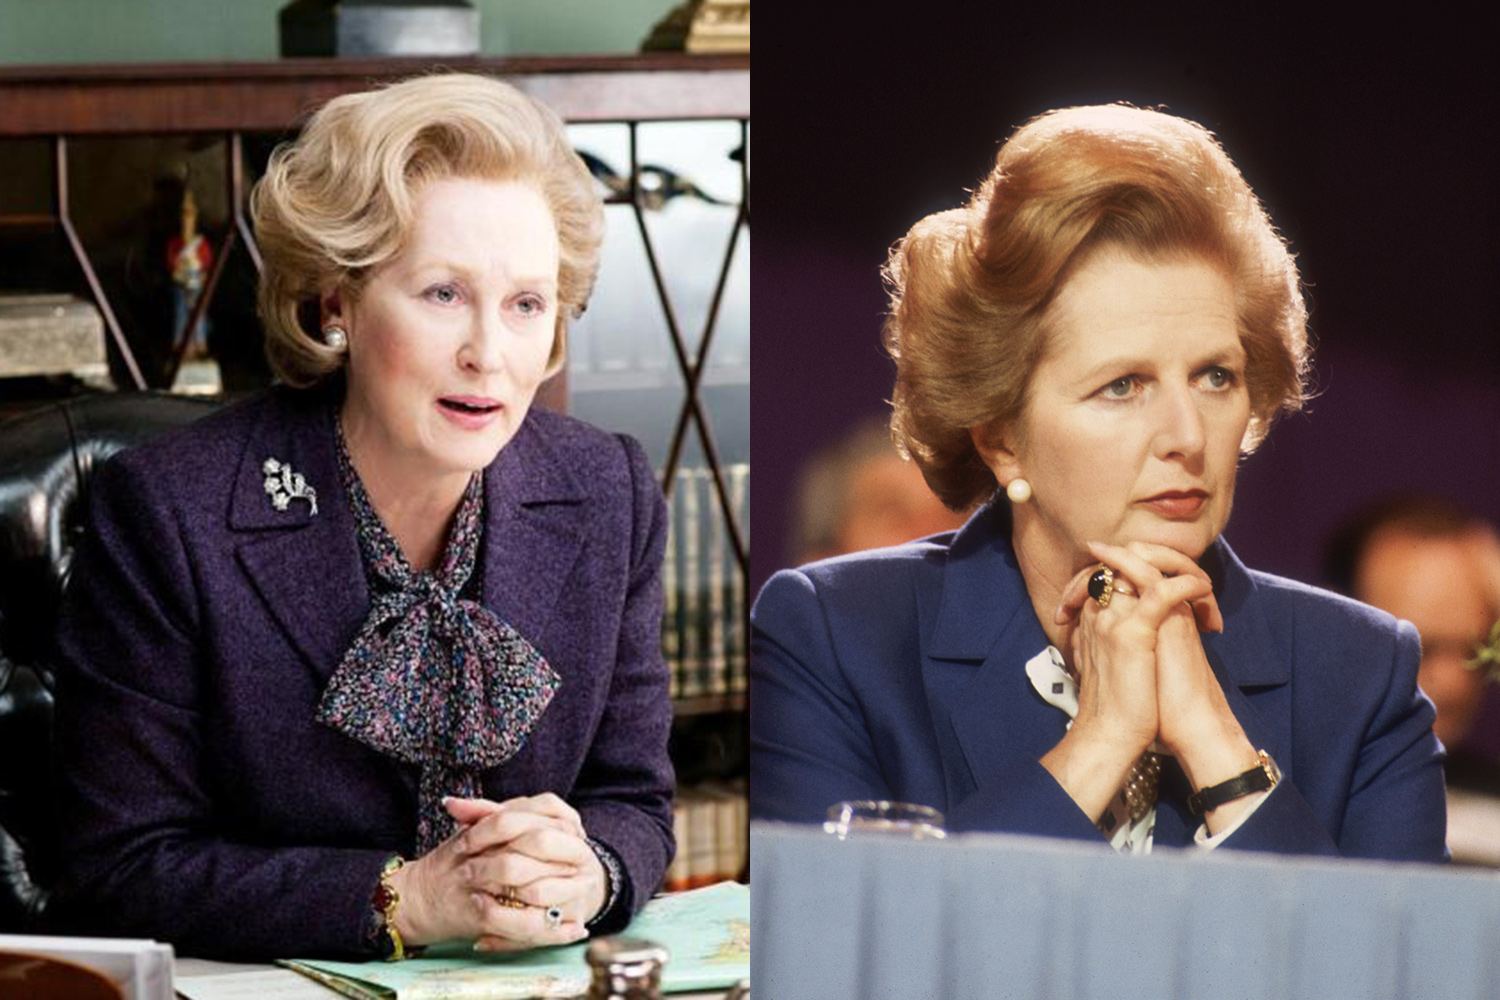 Meryl Streep plays Margaret Thatcher in The Iron Lady.